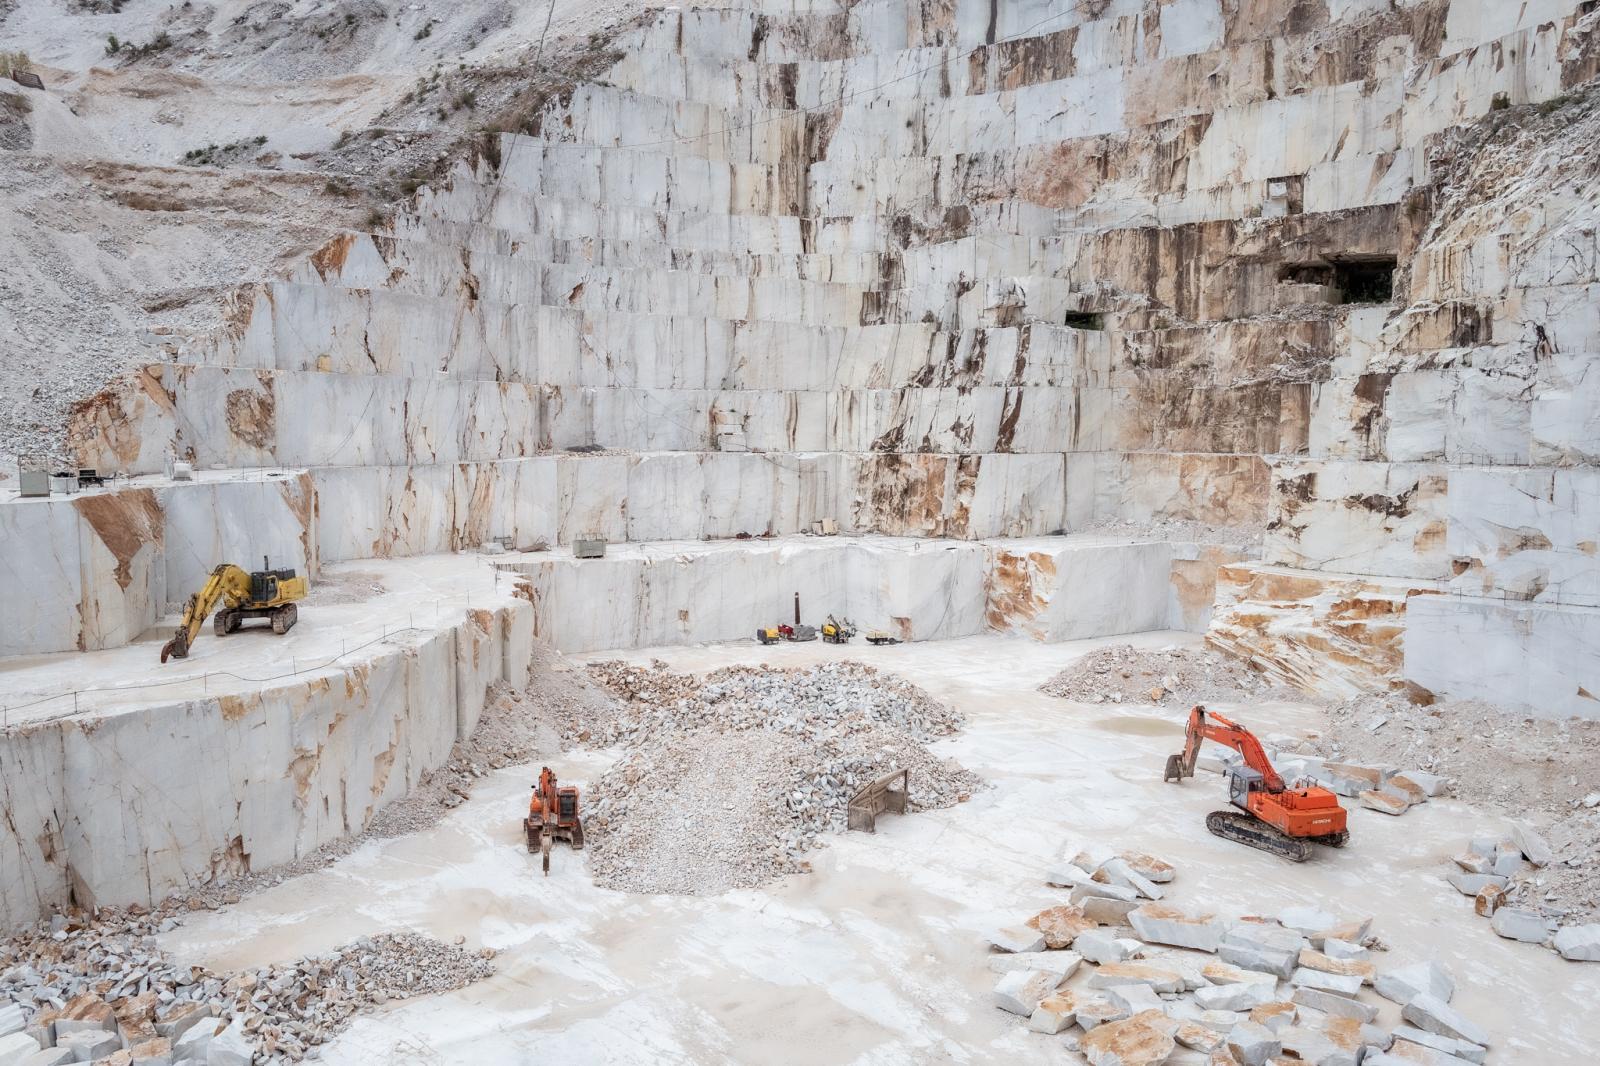 Carrara Marble, the fate of a land in dust. Featured in Radar Magazine (Italy).